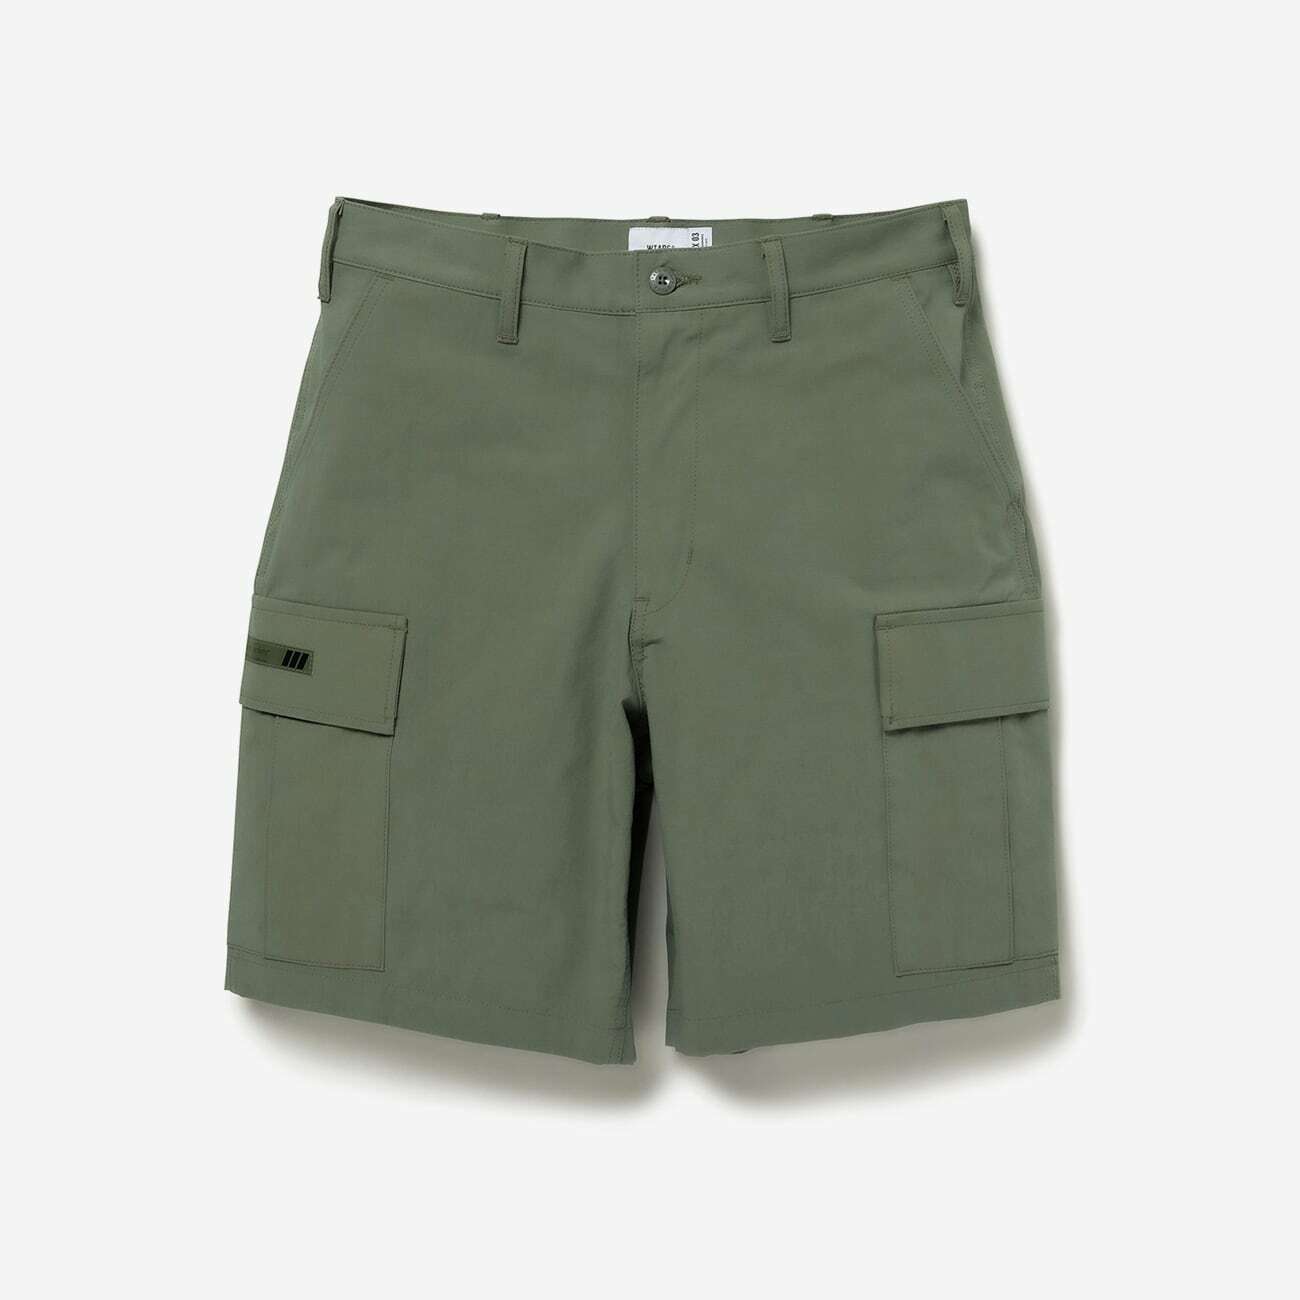 WTAPS MILS9601 / SHORTS / NYCO. RIPSTOP (2 colors)